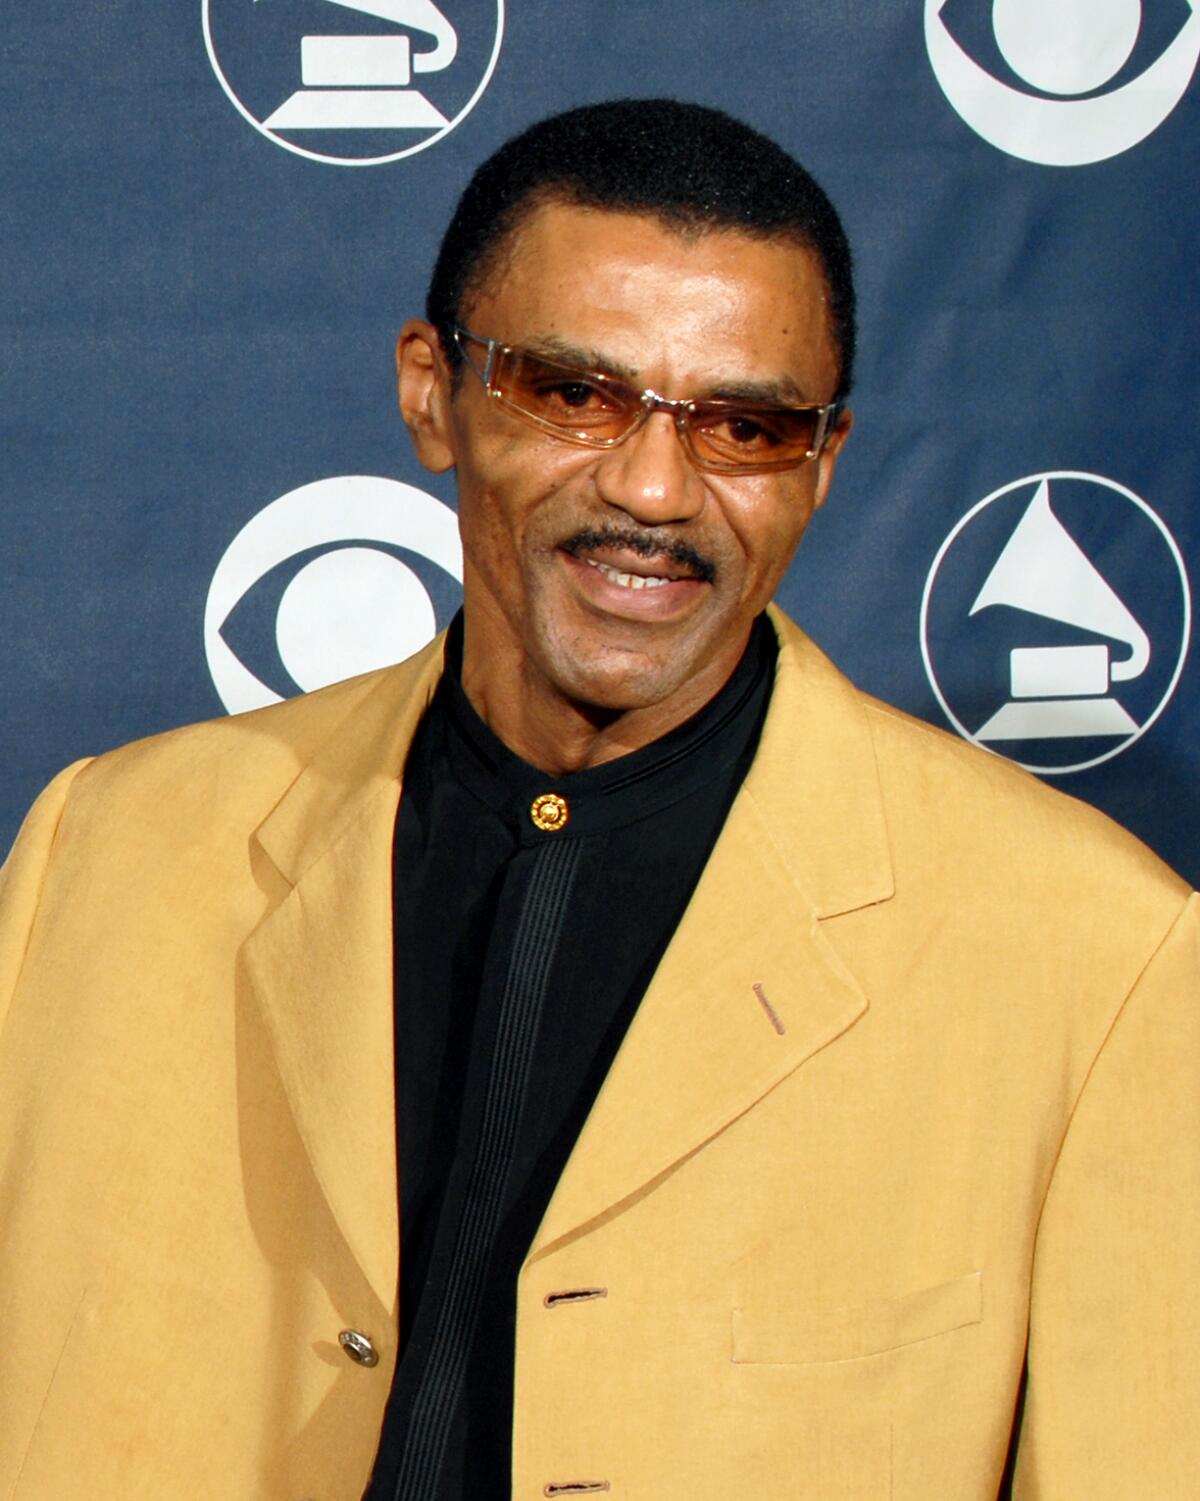 A smiling Ike Turner Jr. wears a yellow jacket and tinted rectangular glasses.